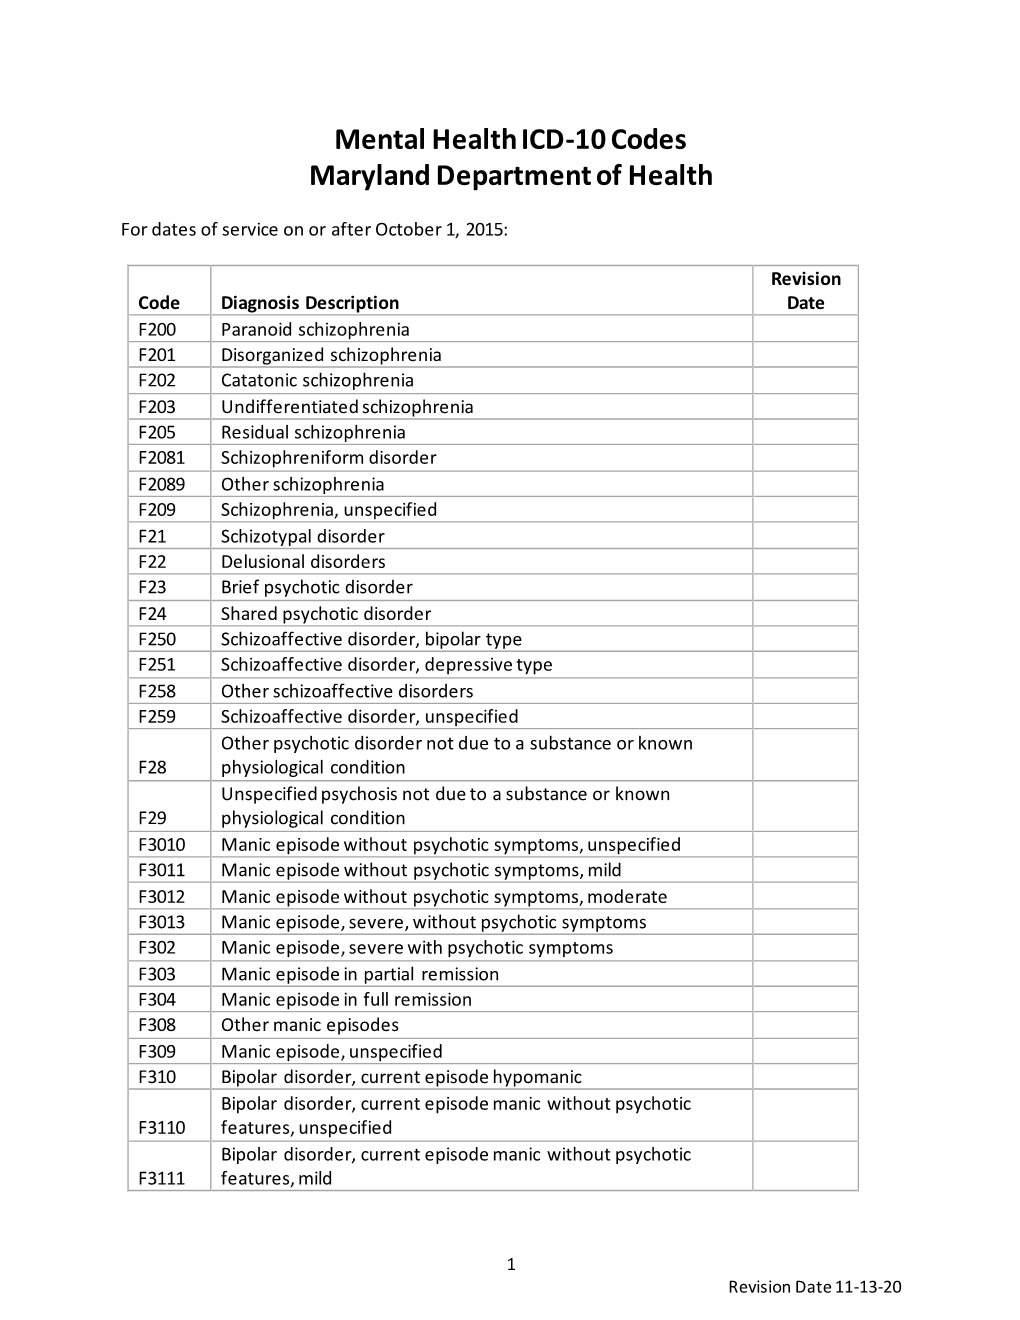 Mental Health ICD-10 Codes Maryland Department of Health